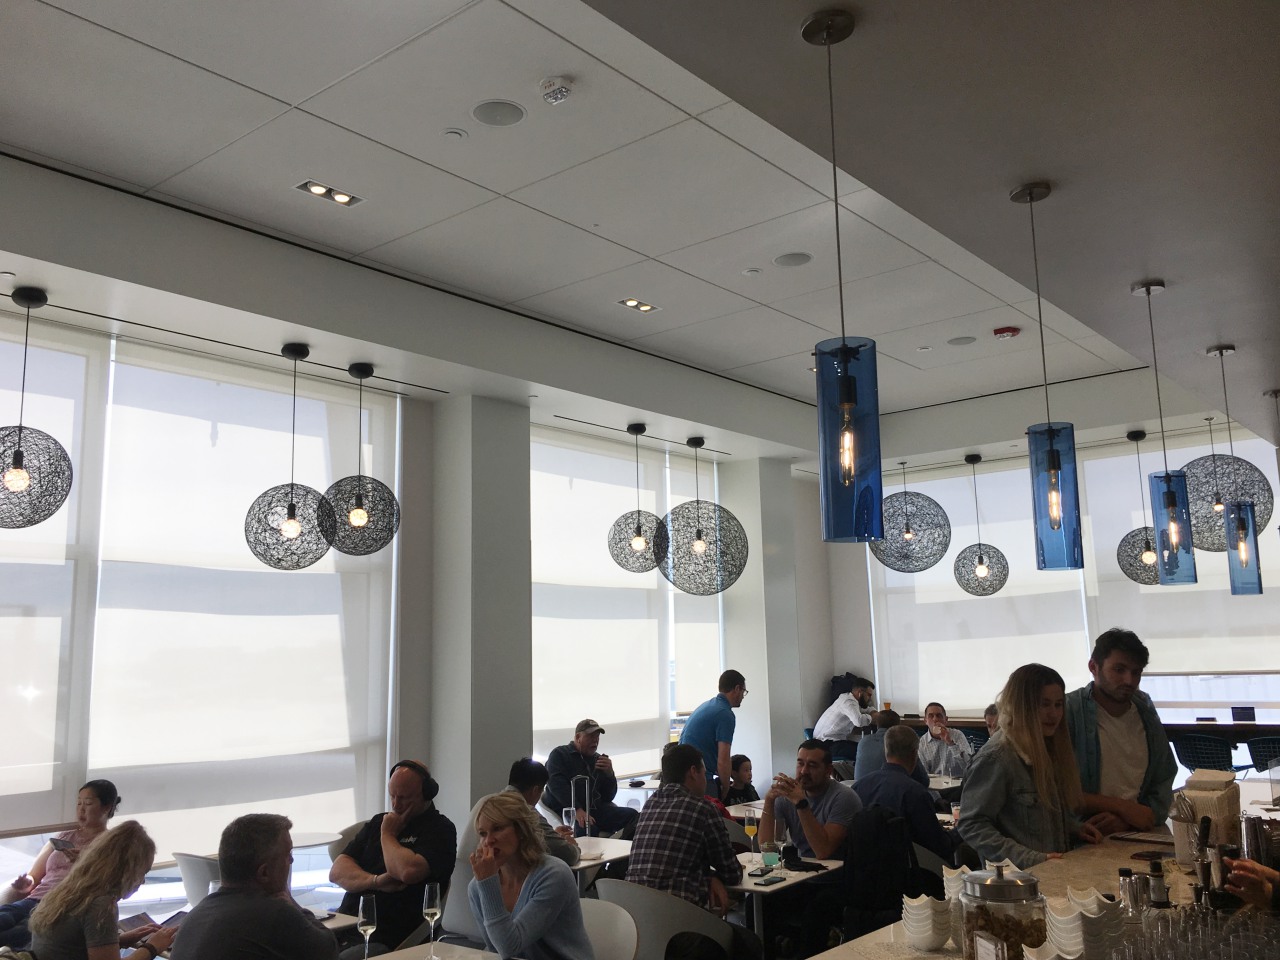 AMEX Centurion Lounges Still Crowded After New Policy